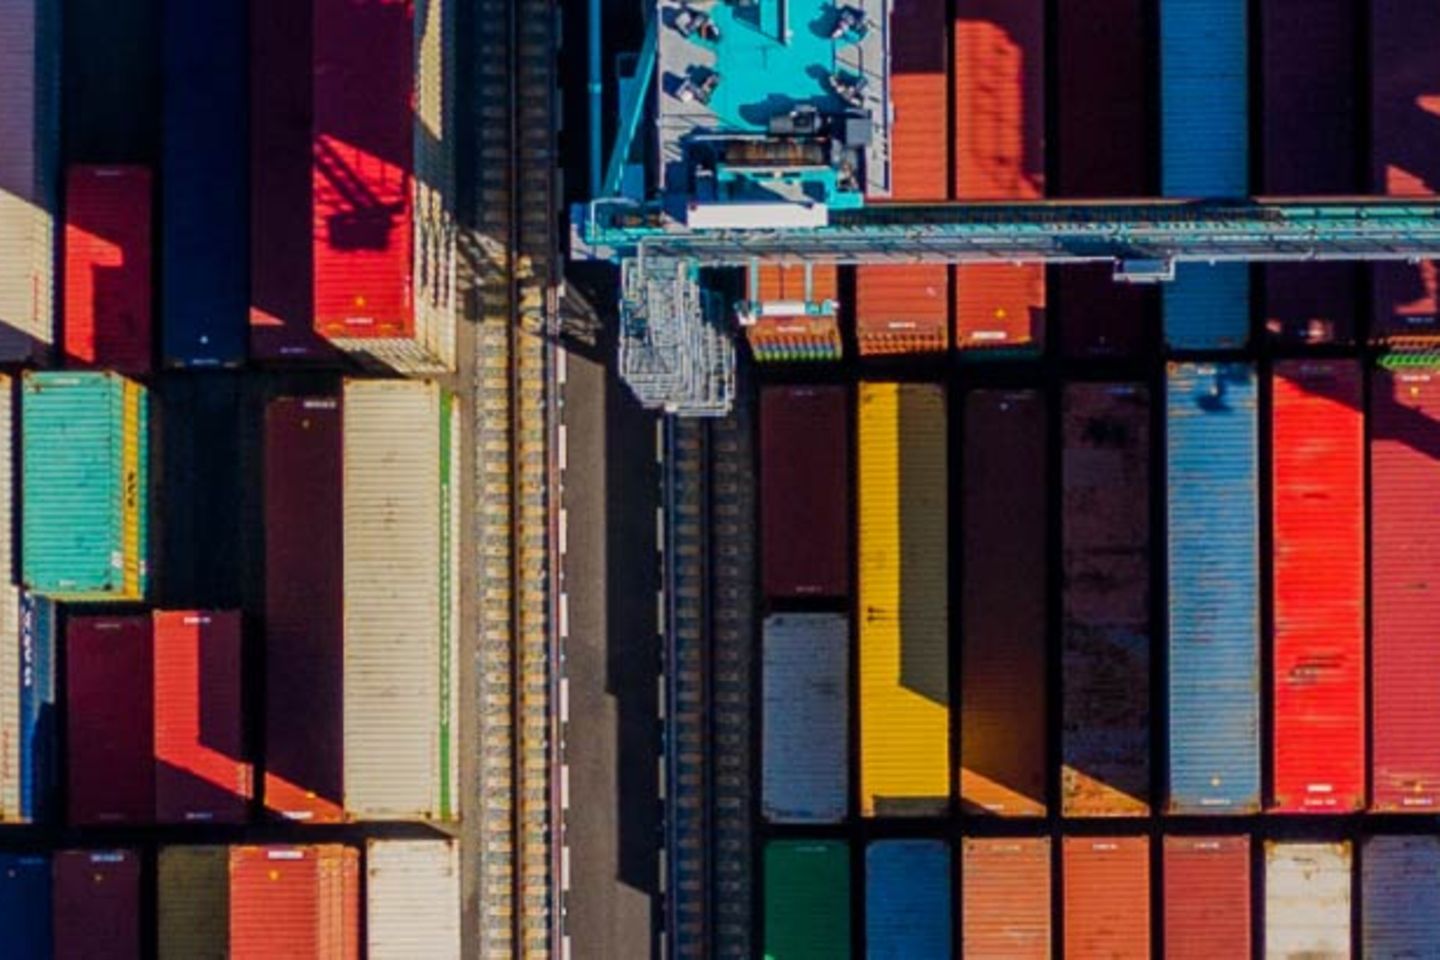 Birds-eye view of cargo containers 